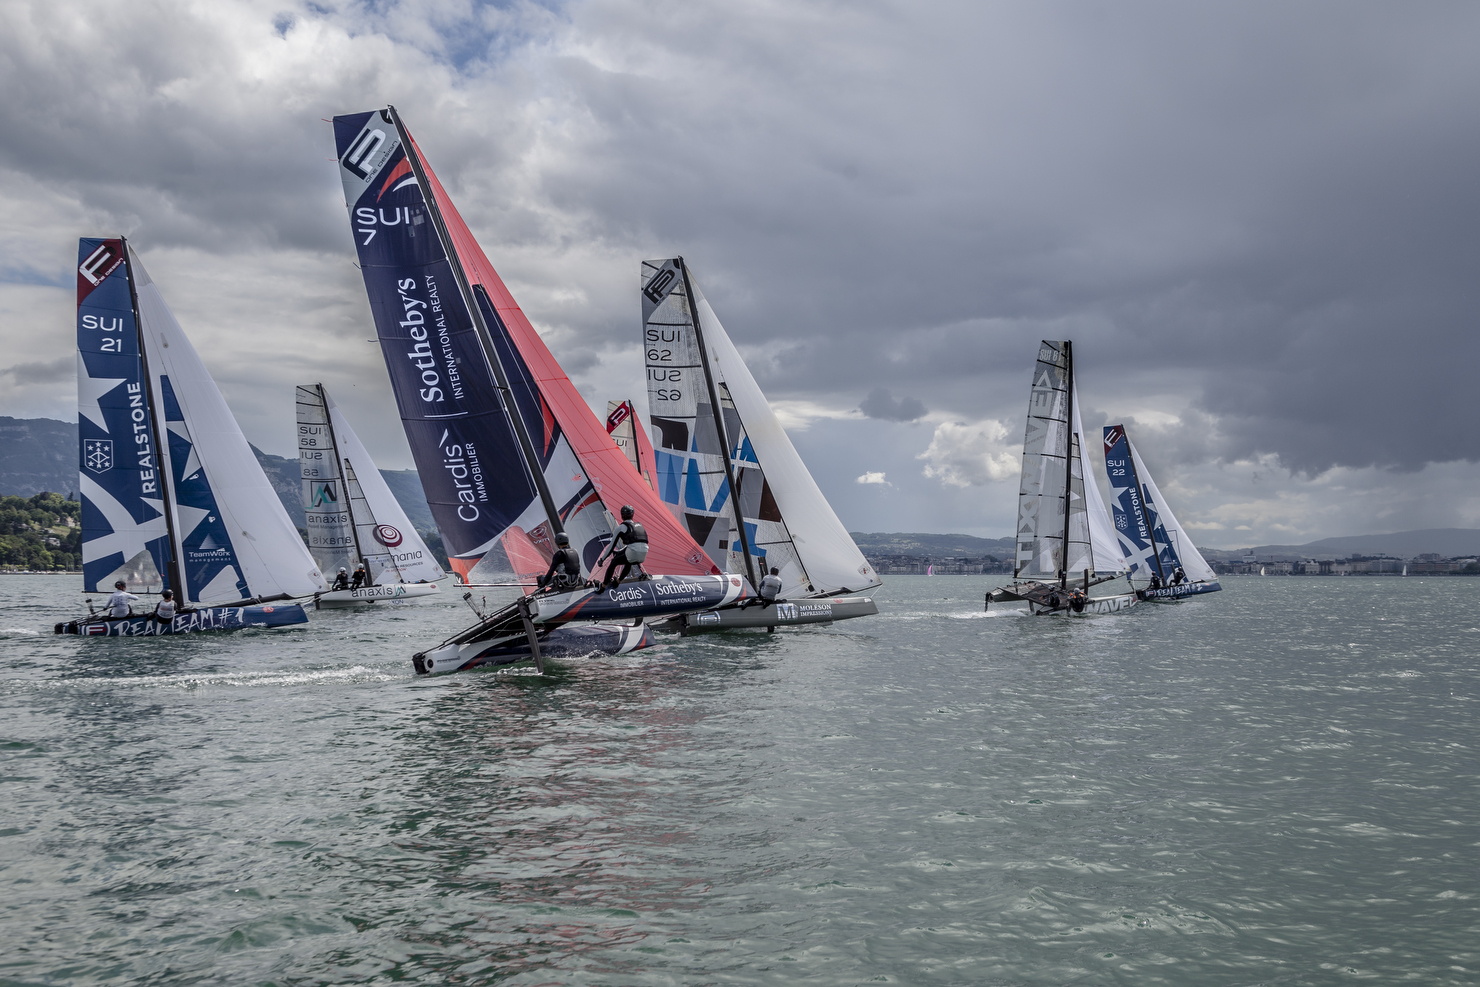  F16Cat, Flying Phantom  Open des Multicoques  SN Geneve  Final Results